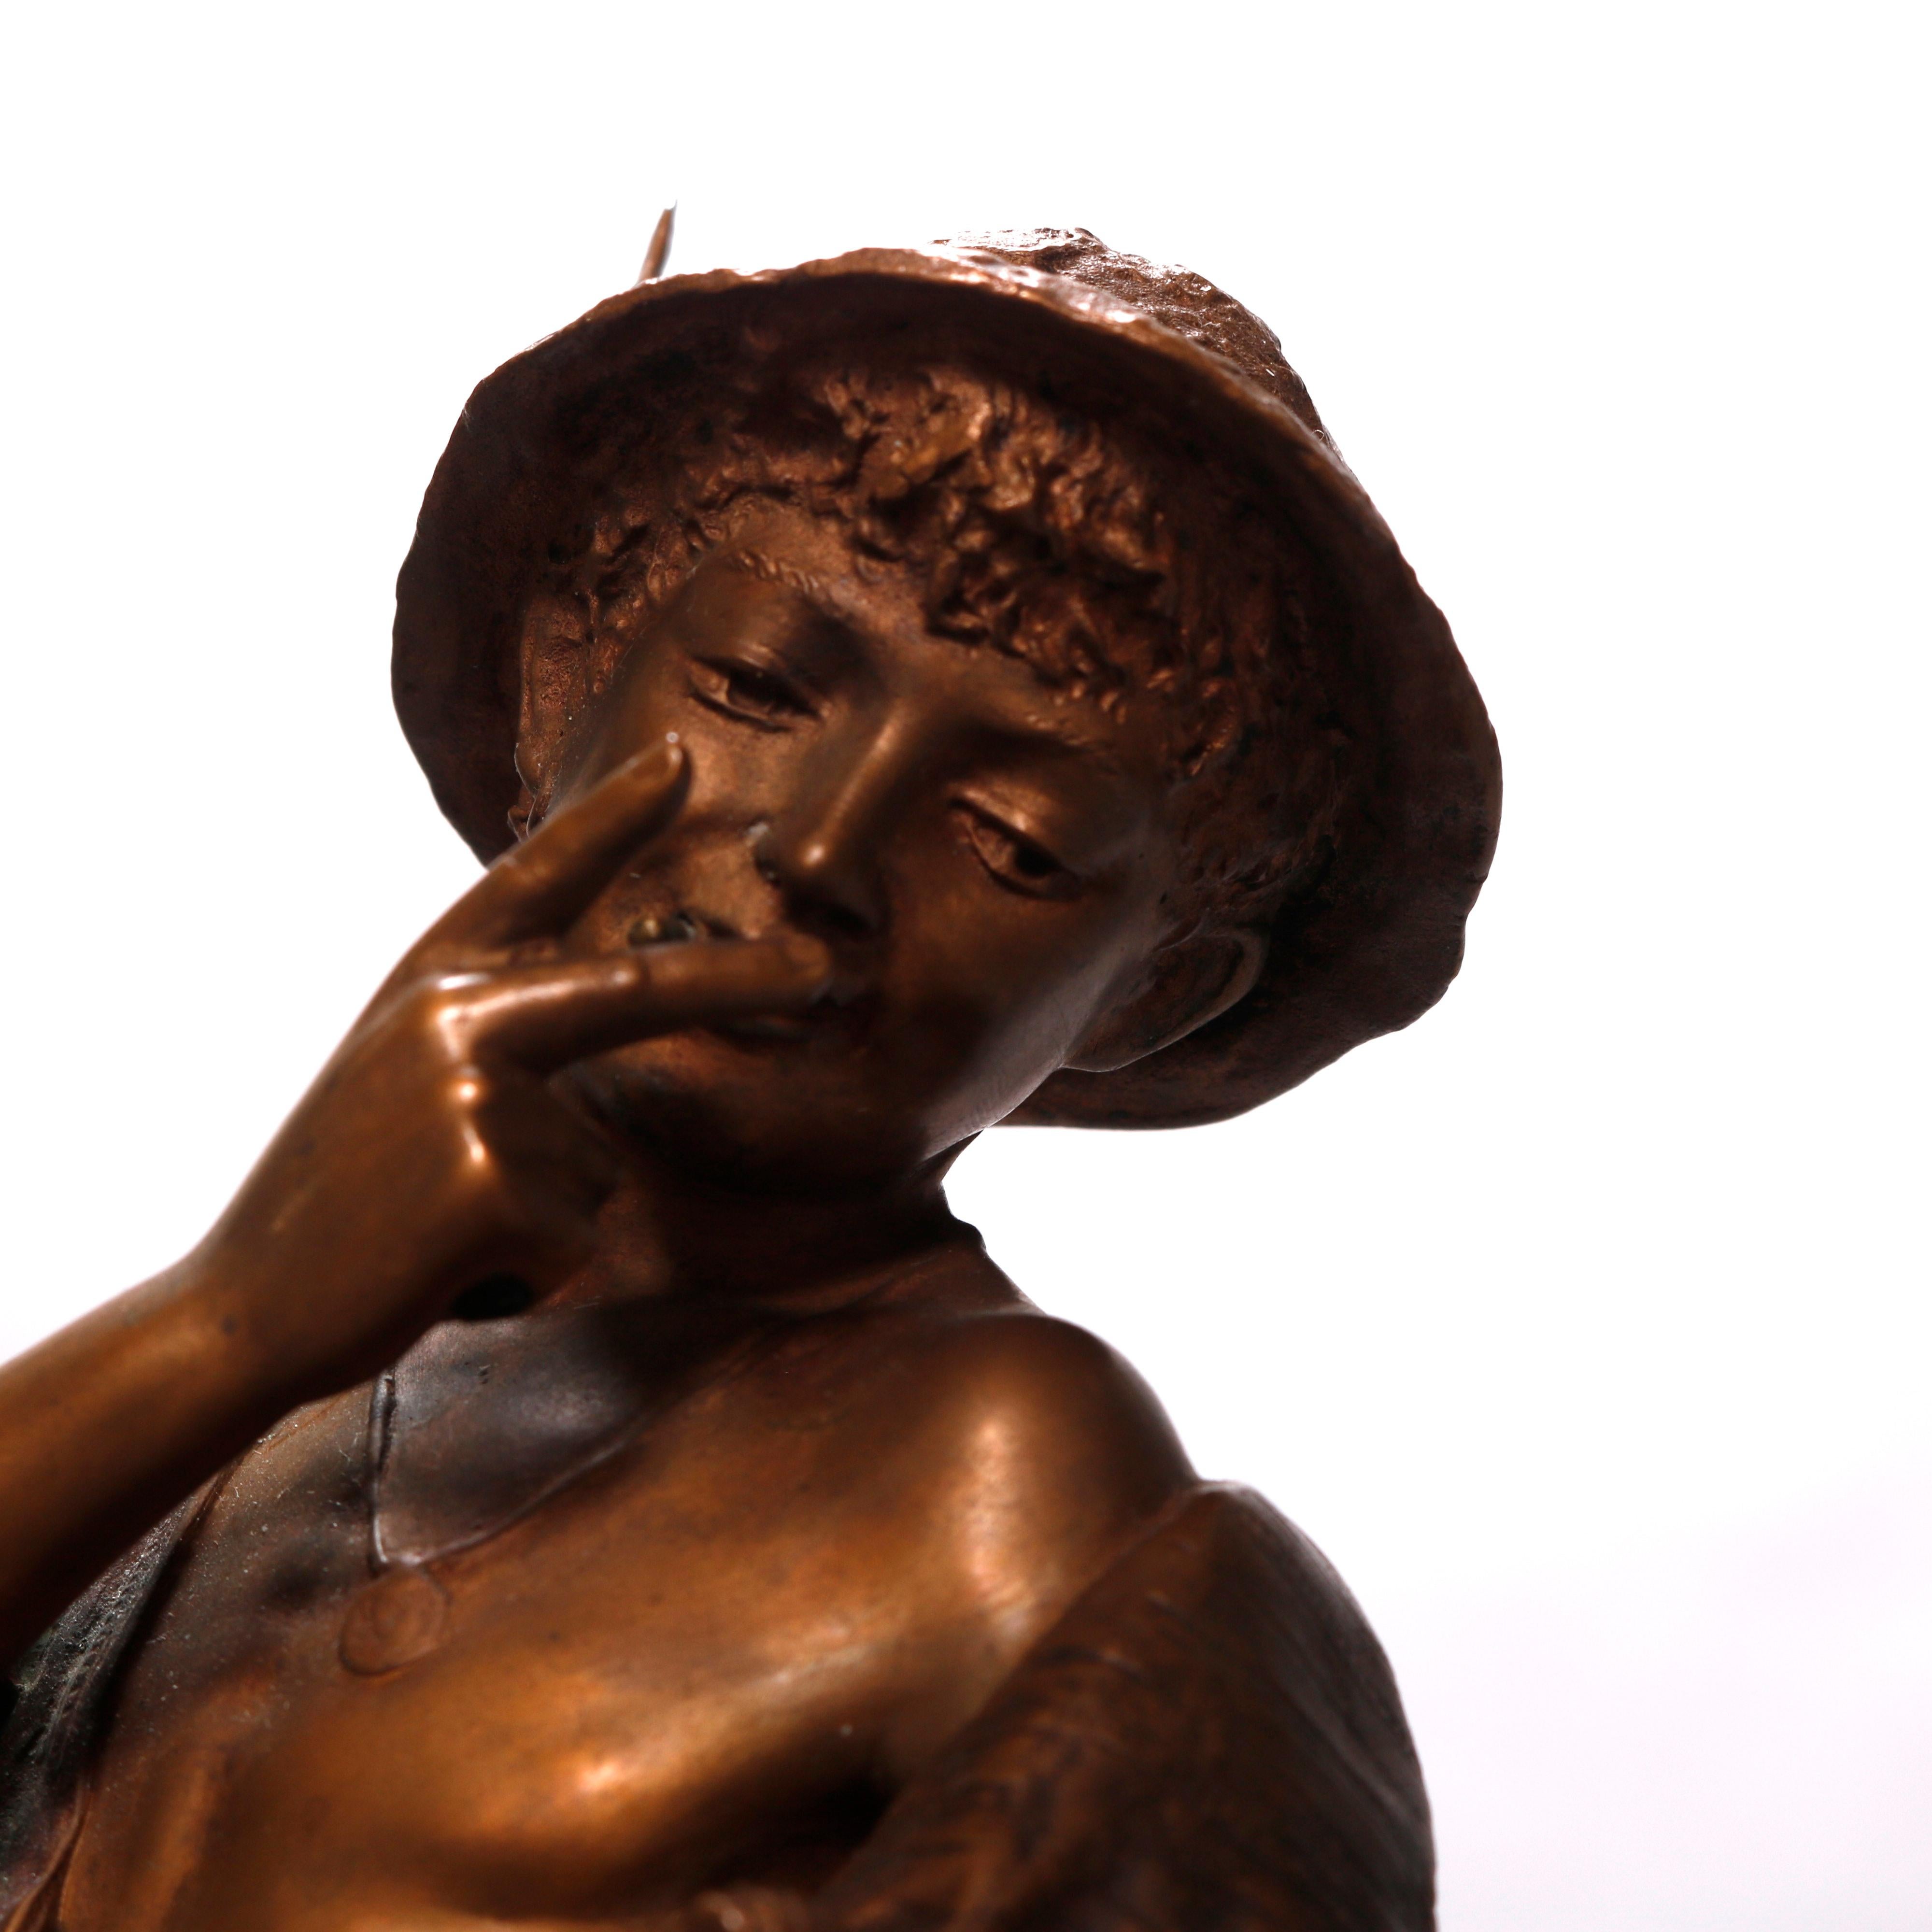 An antique bronze statue by Carl Theodor Wegener (Denmark, 1862-1935) depicts a boy (street urchin) with a cigar and monkey mounted on marble plinth, signed on base as photographed, 19th century

***DELIVERY NOTICE – Due to COVID-19 we are employing